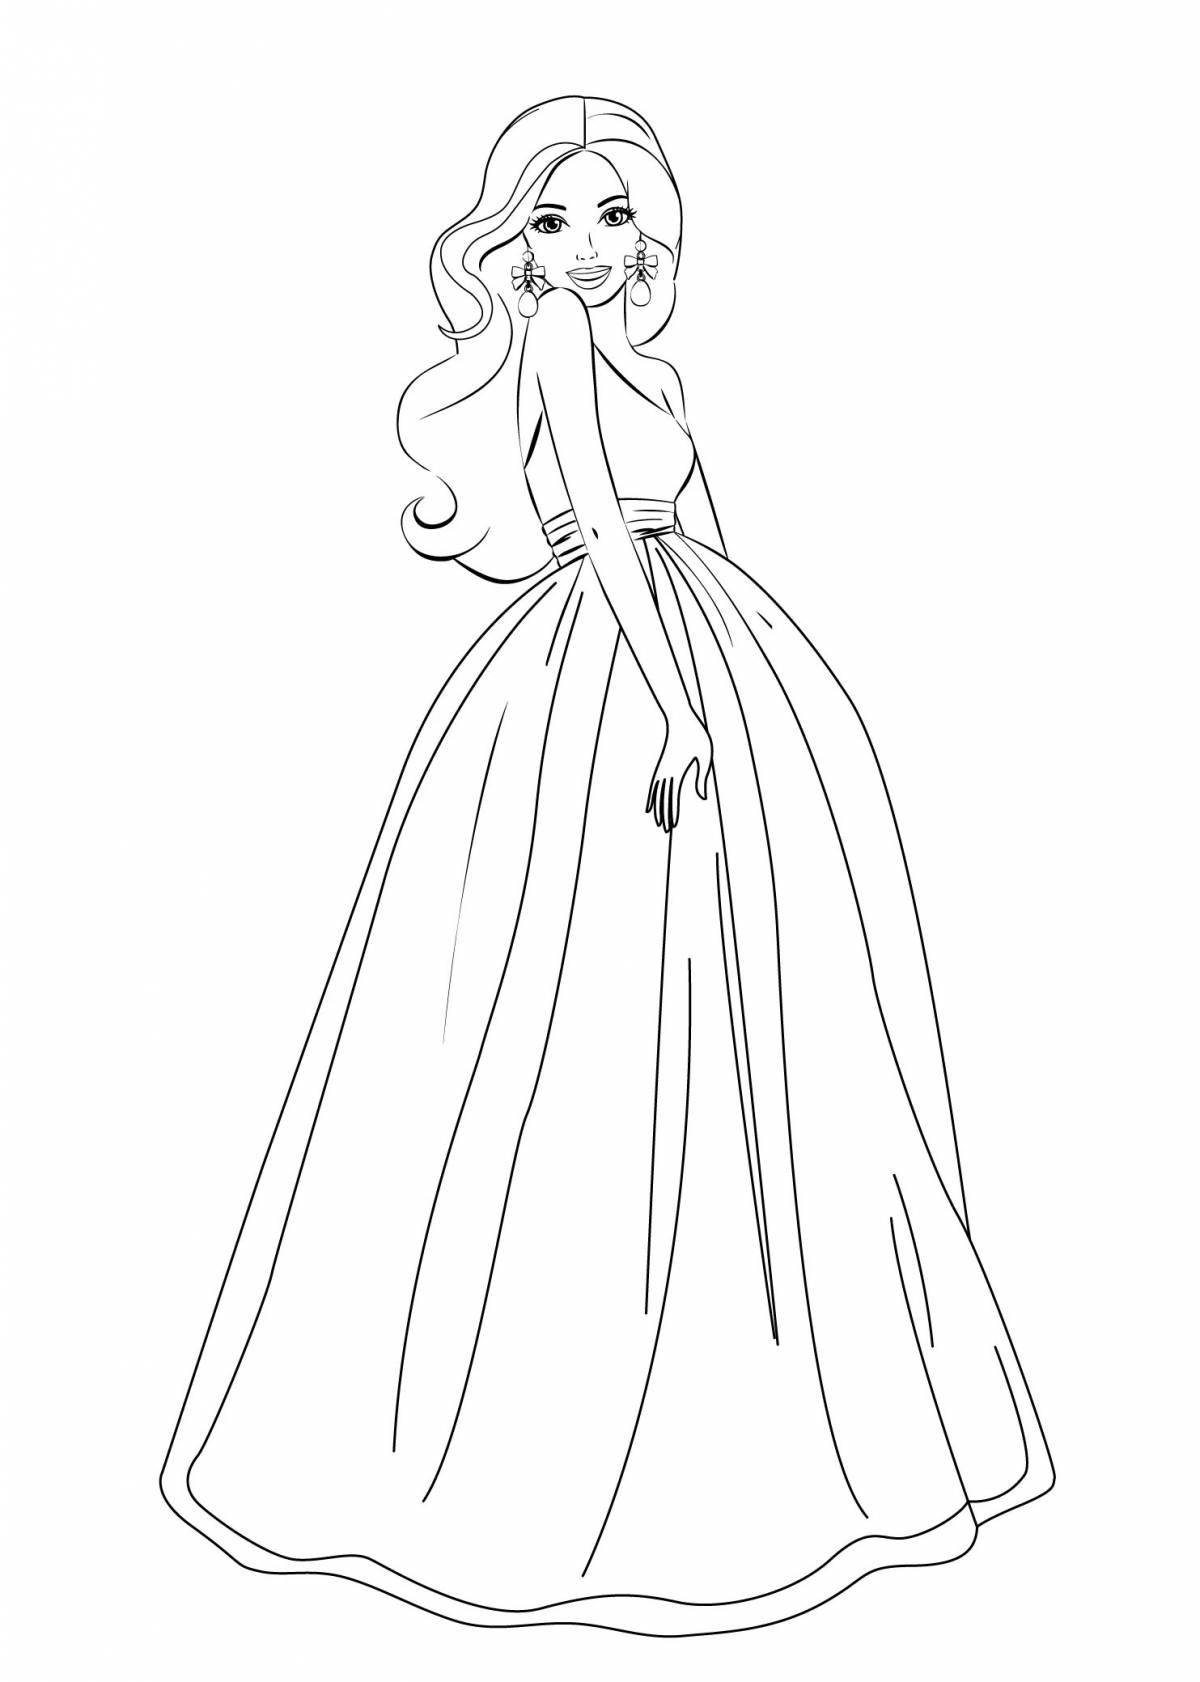 Majestic coloring of barbie in a dress